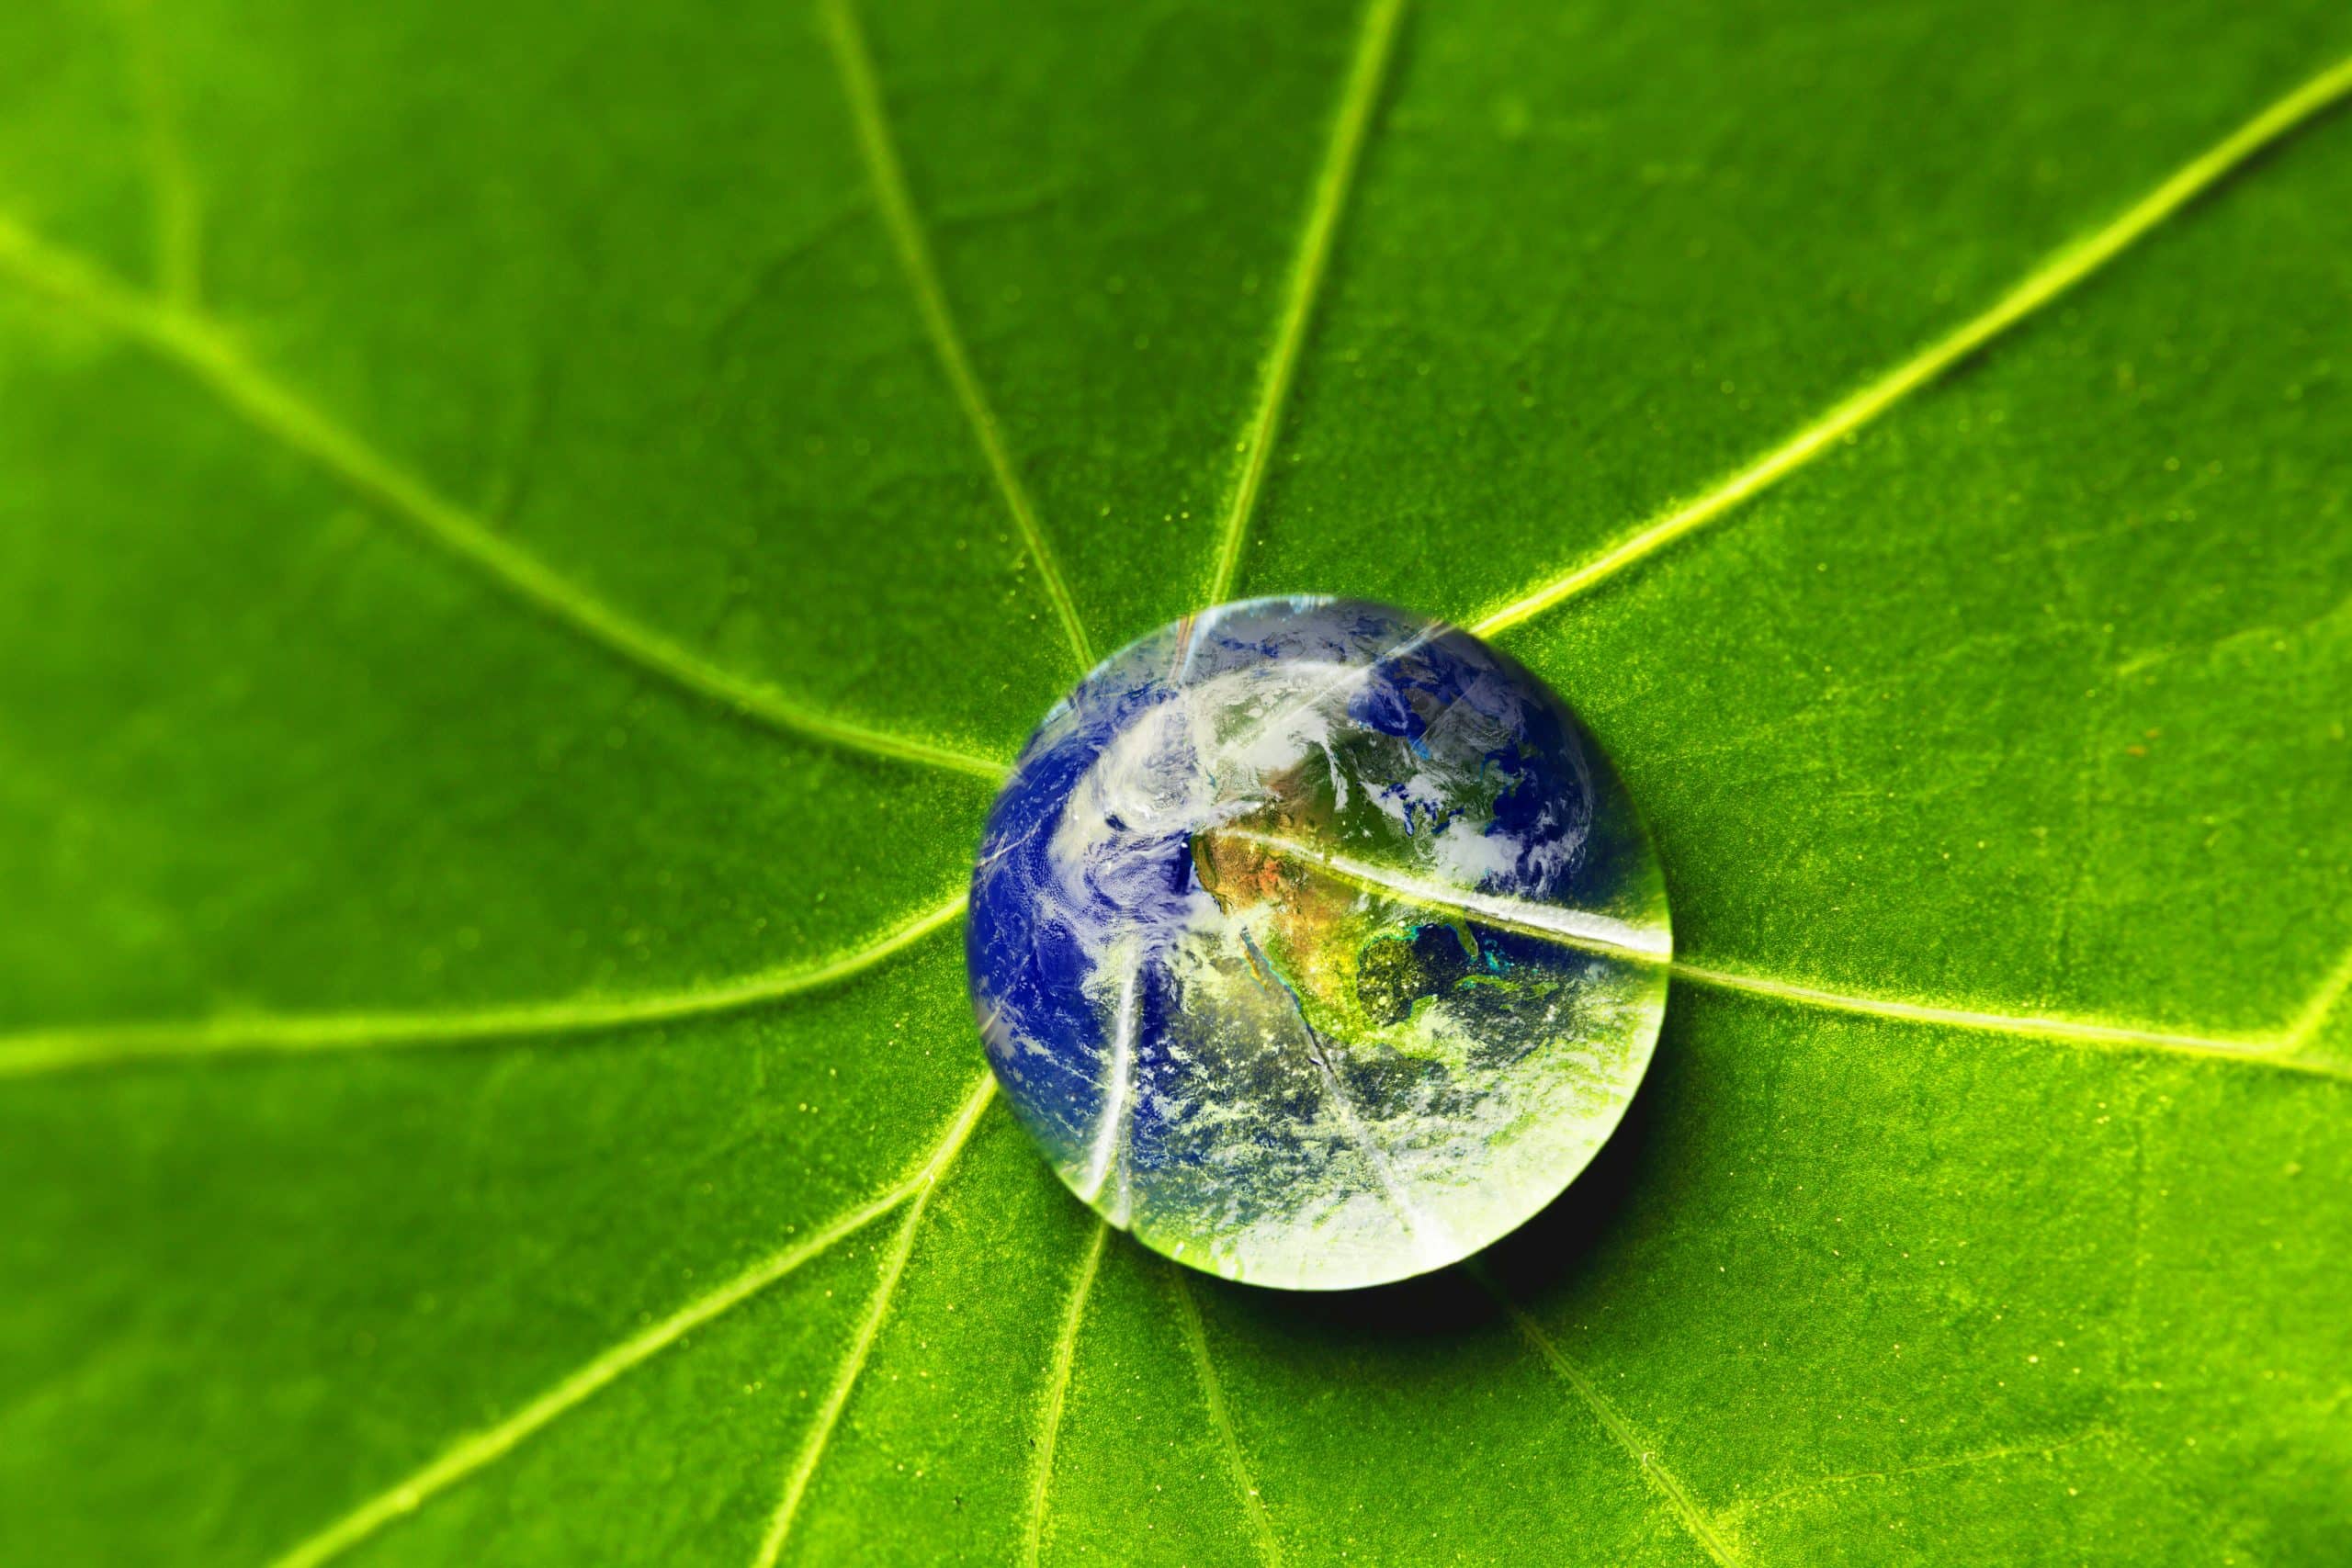 The,World,In,A,Drop,Of,Water,On,A,Leaf.